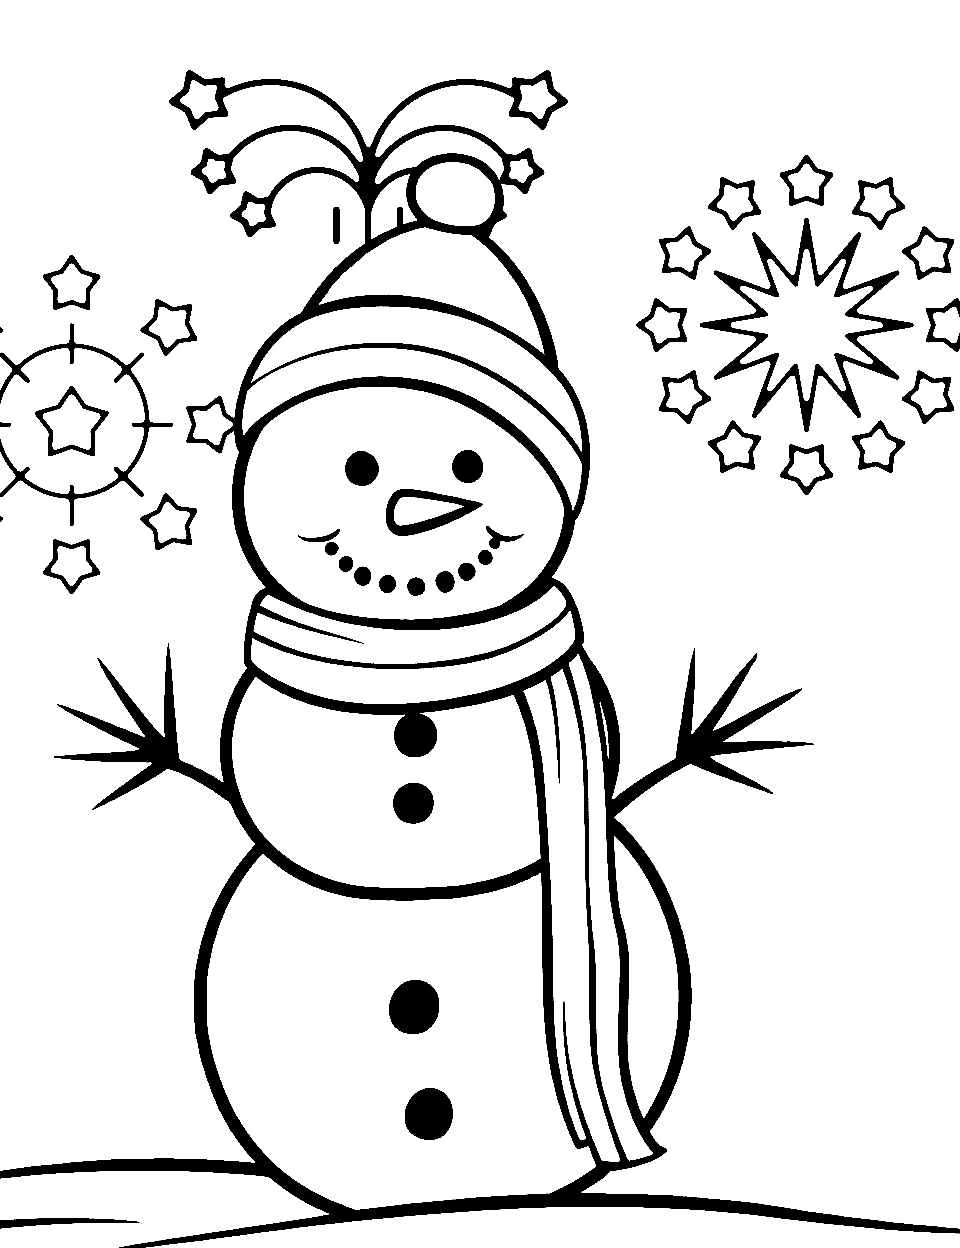 New Year's Snowman Celebration Coloring Page - A snowman with fireworks in the background, celebrating New Year’s.